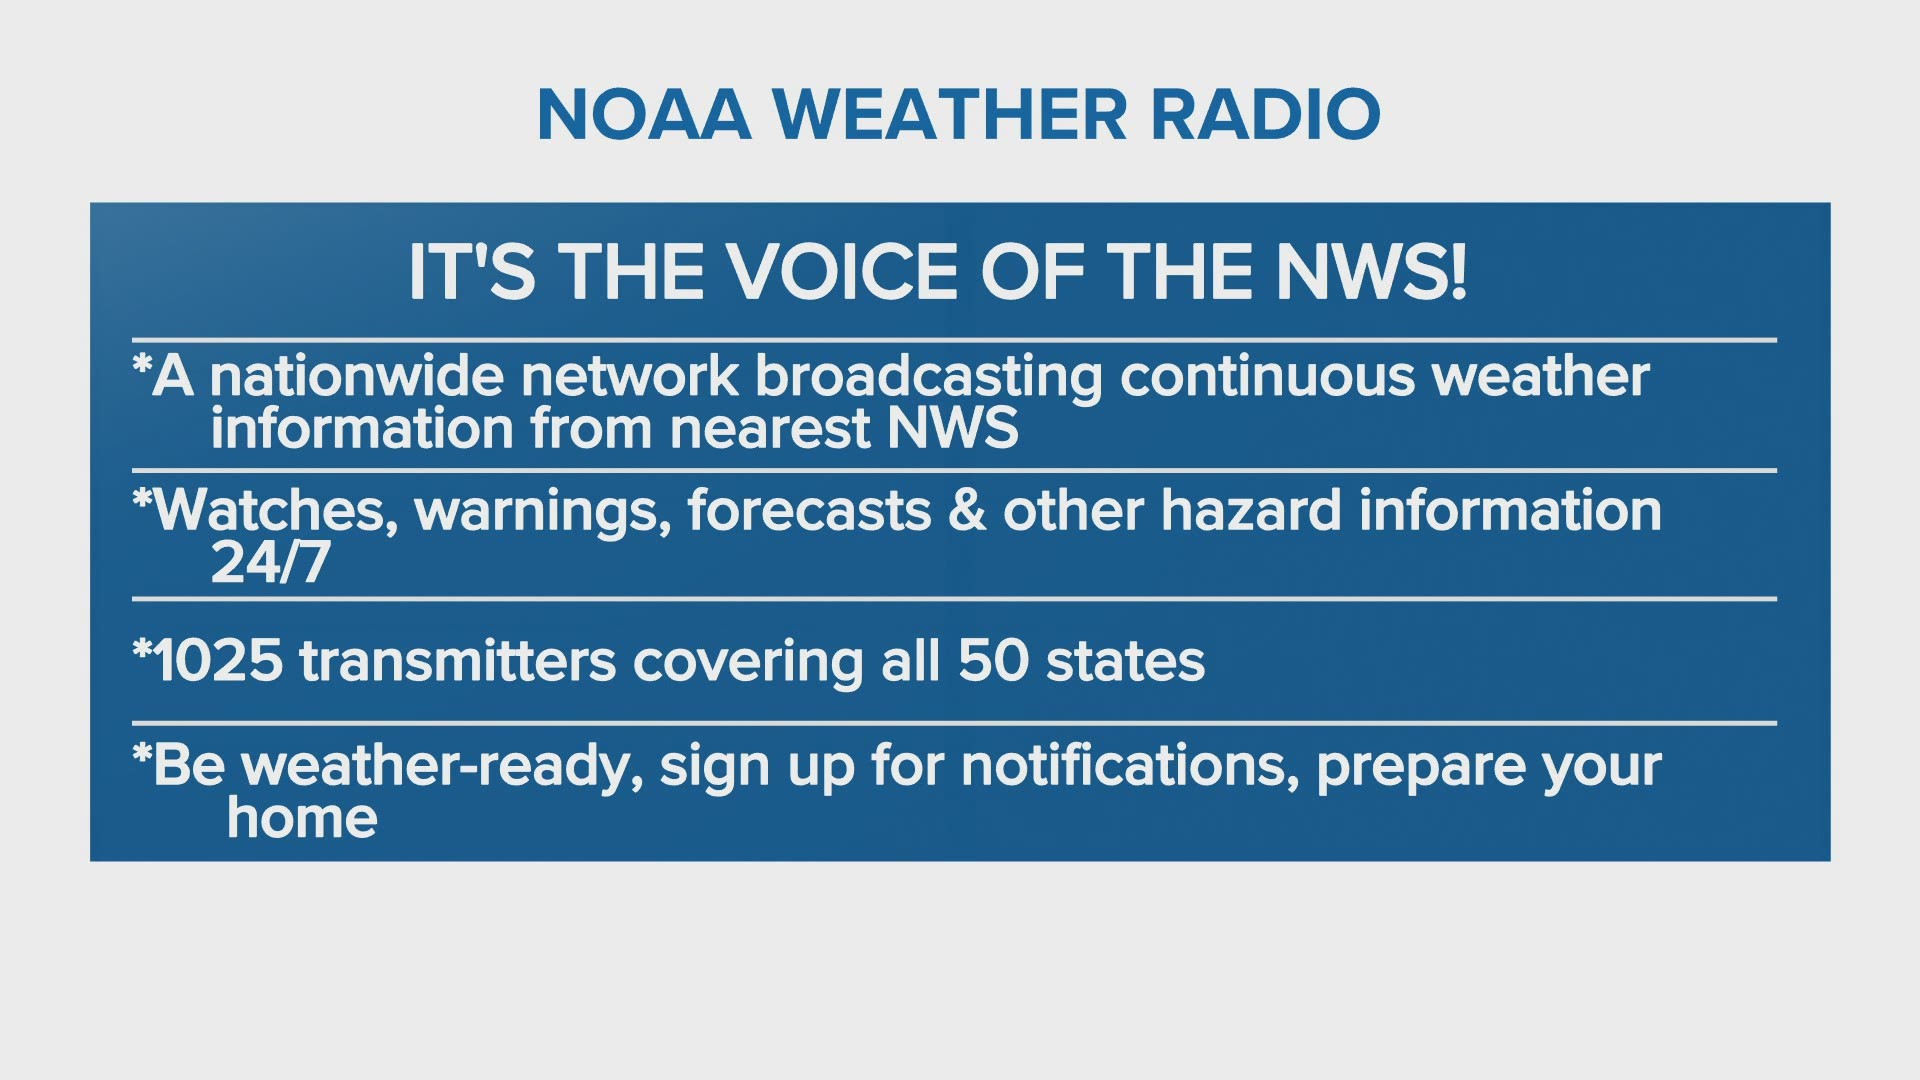 10news meteorologist Rebecca Sweet wraps up Severe Weather Awareness Week by talking about the NOAA Weather Radio.